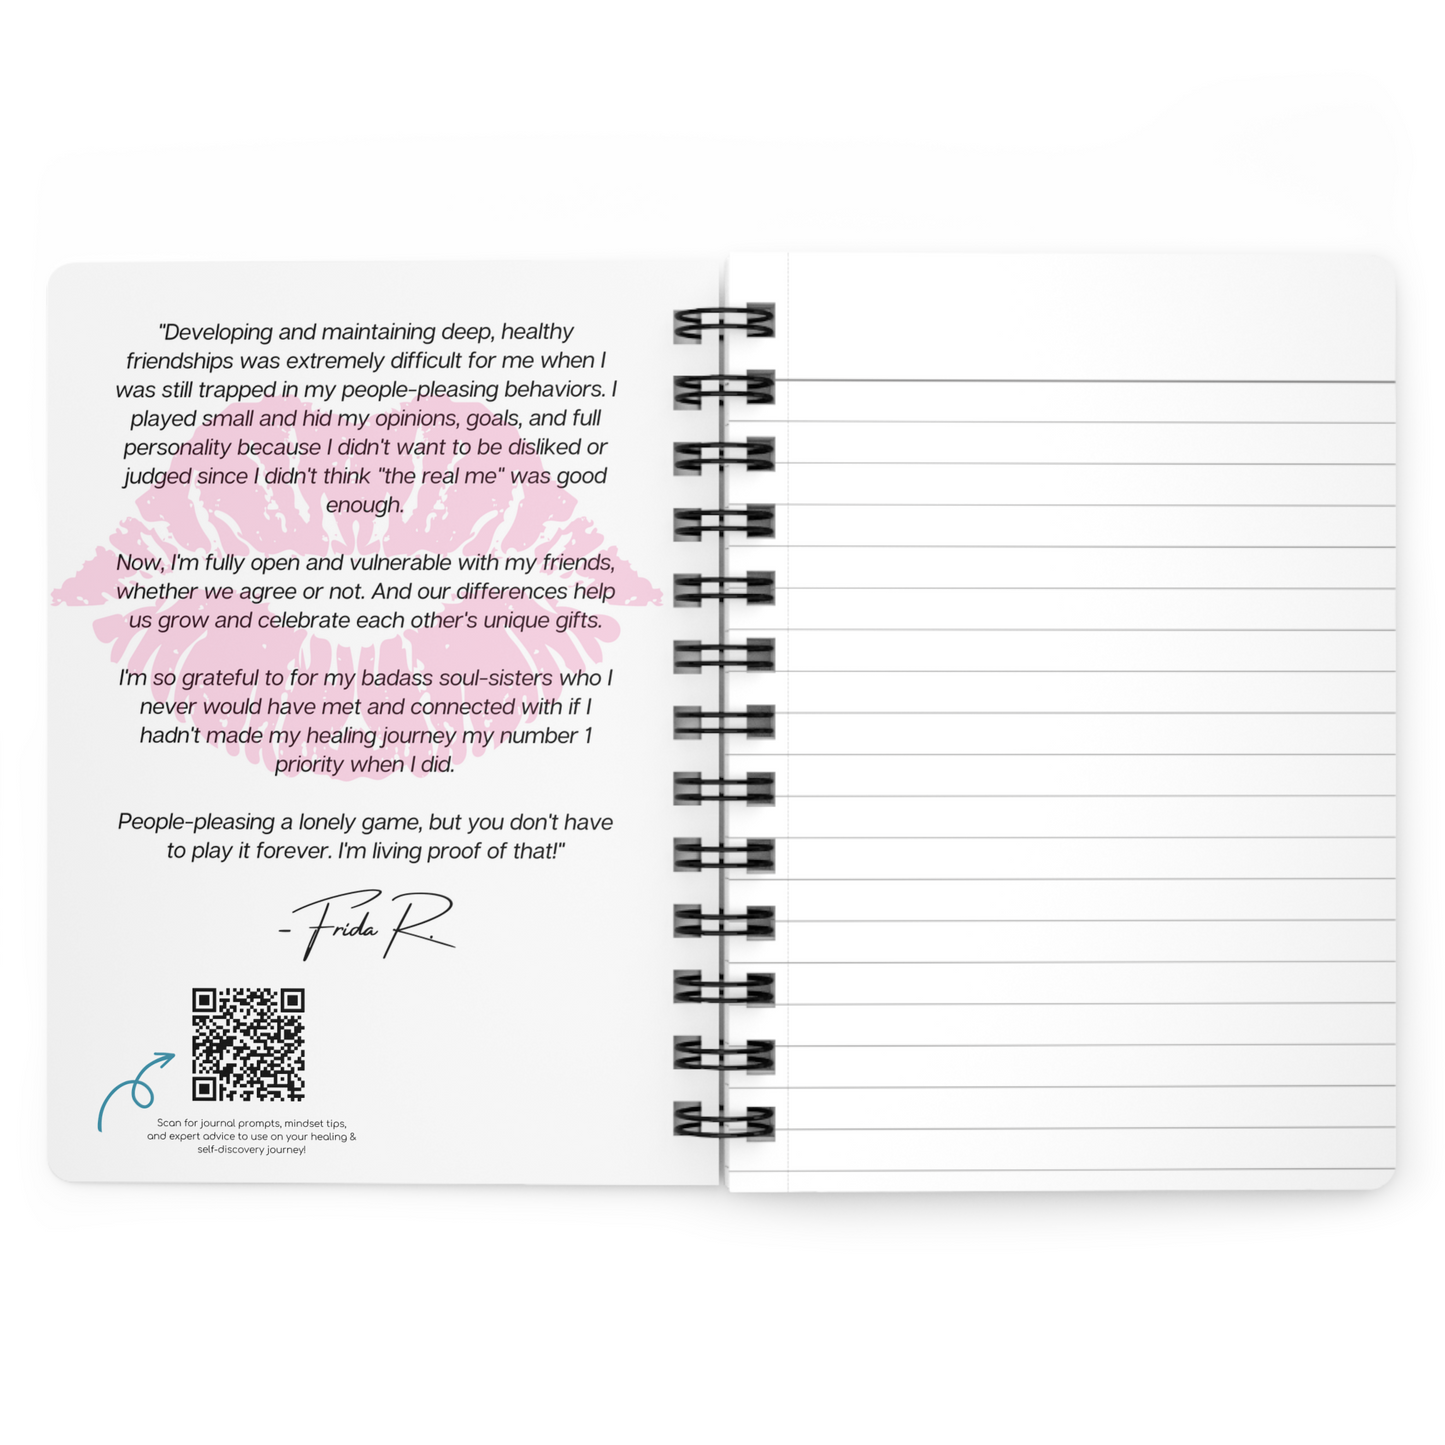 A pink spiral notebook adorned with the "Empowered Women Empower Women" Women's Empowerment Journal.